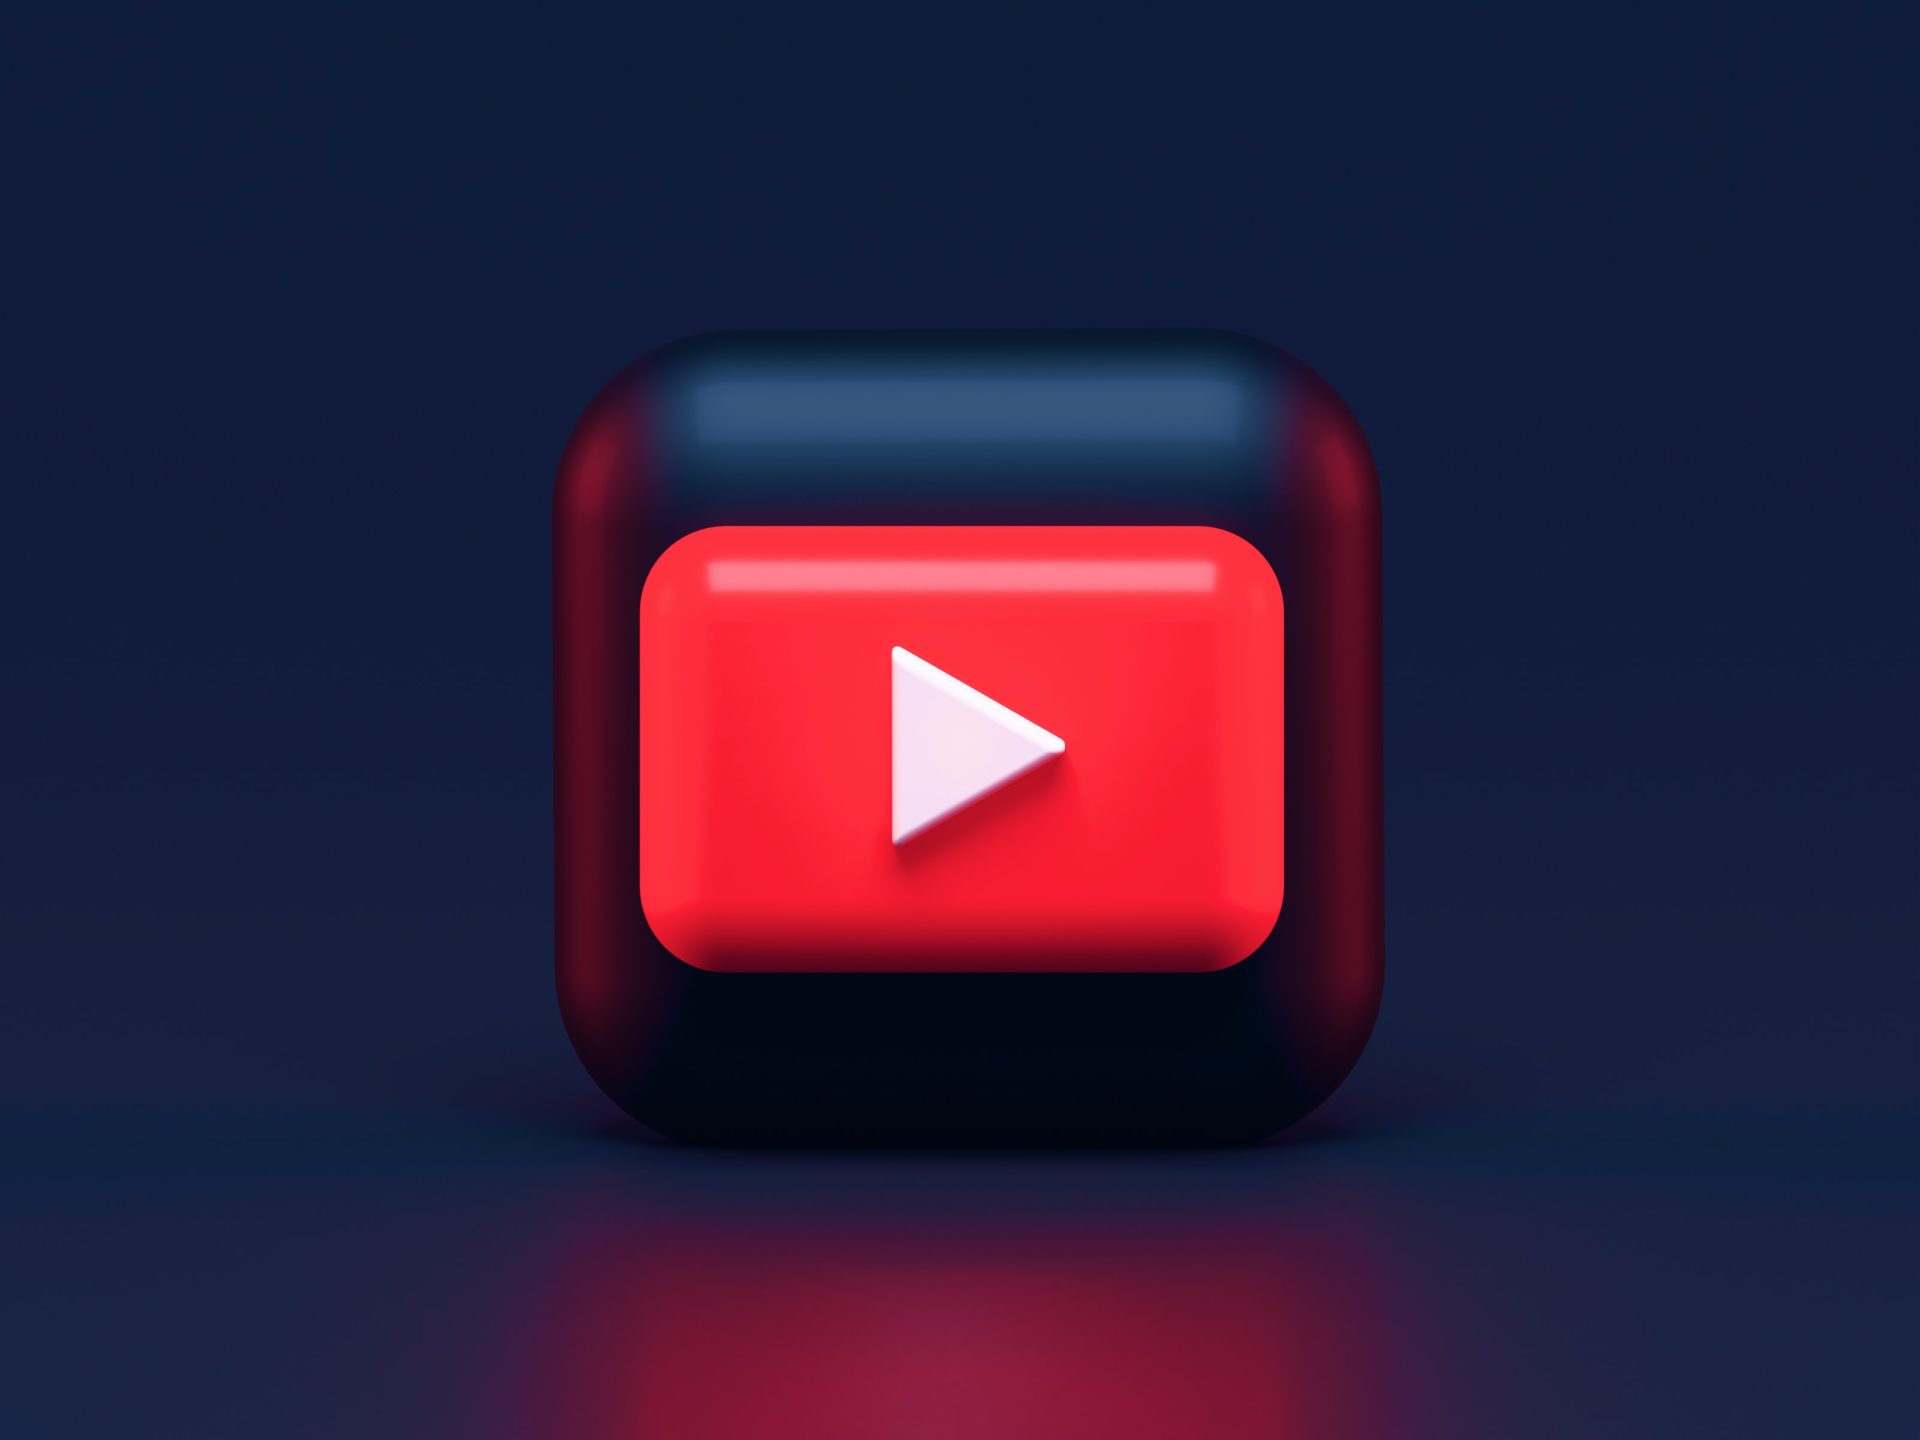 youtube playables